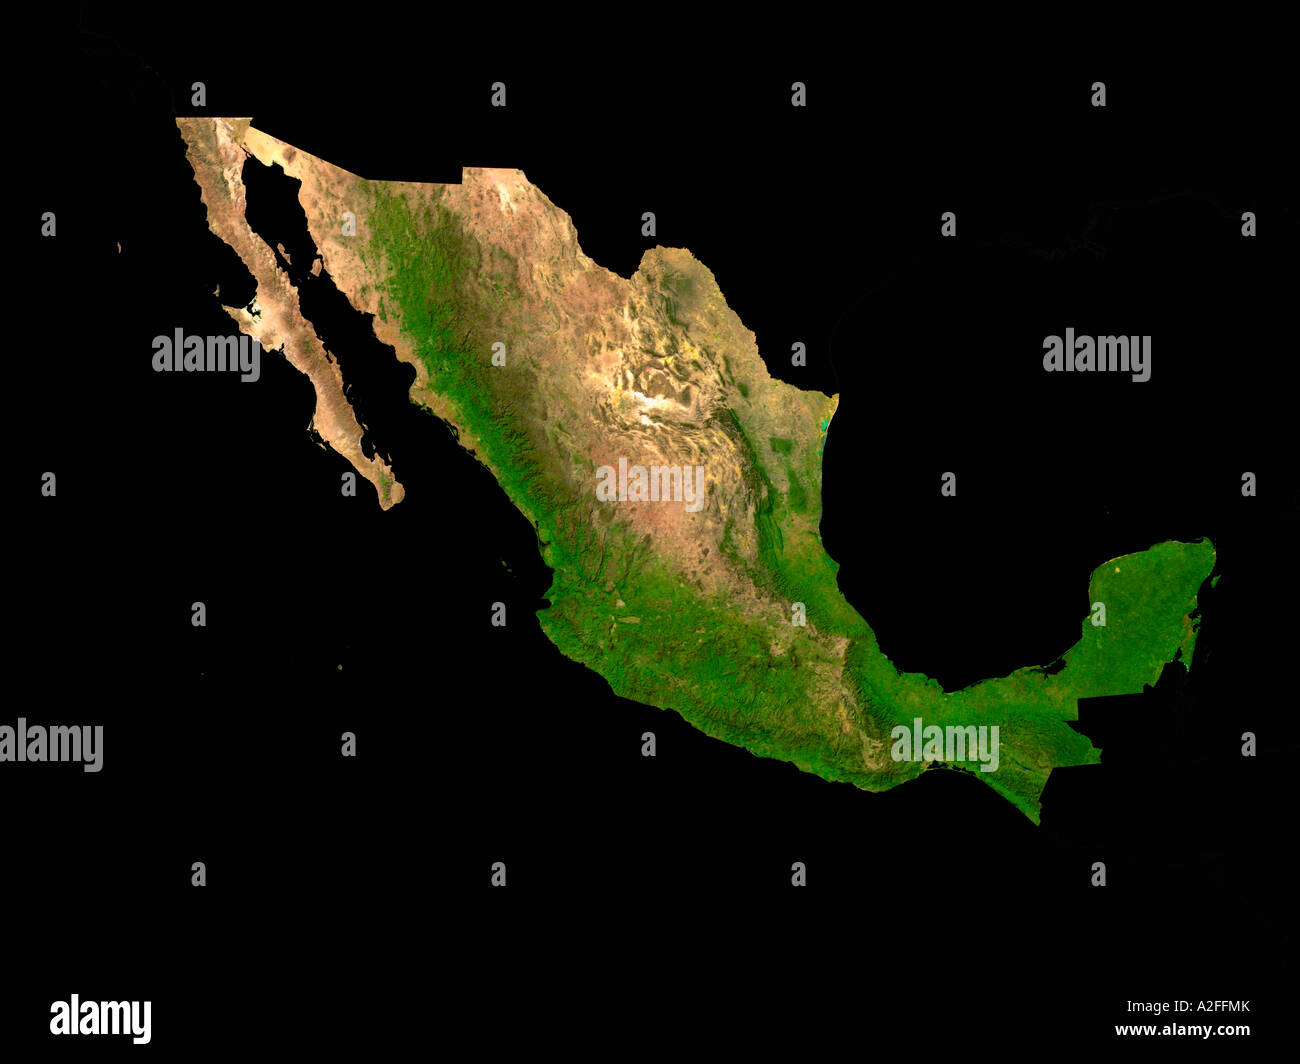 Highlighted Satellite Image Of Mexico Without Surrounding Countries